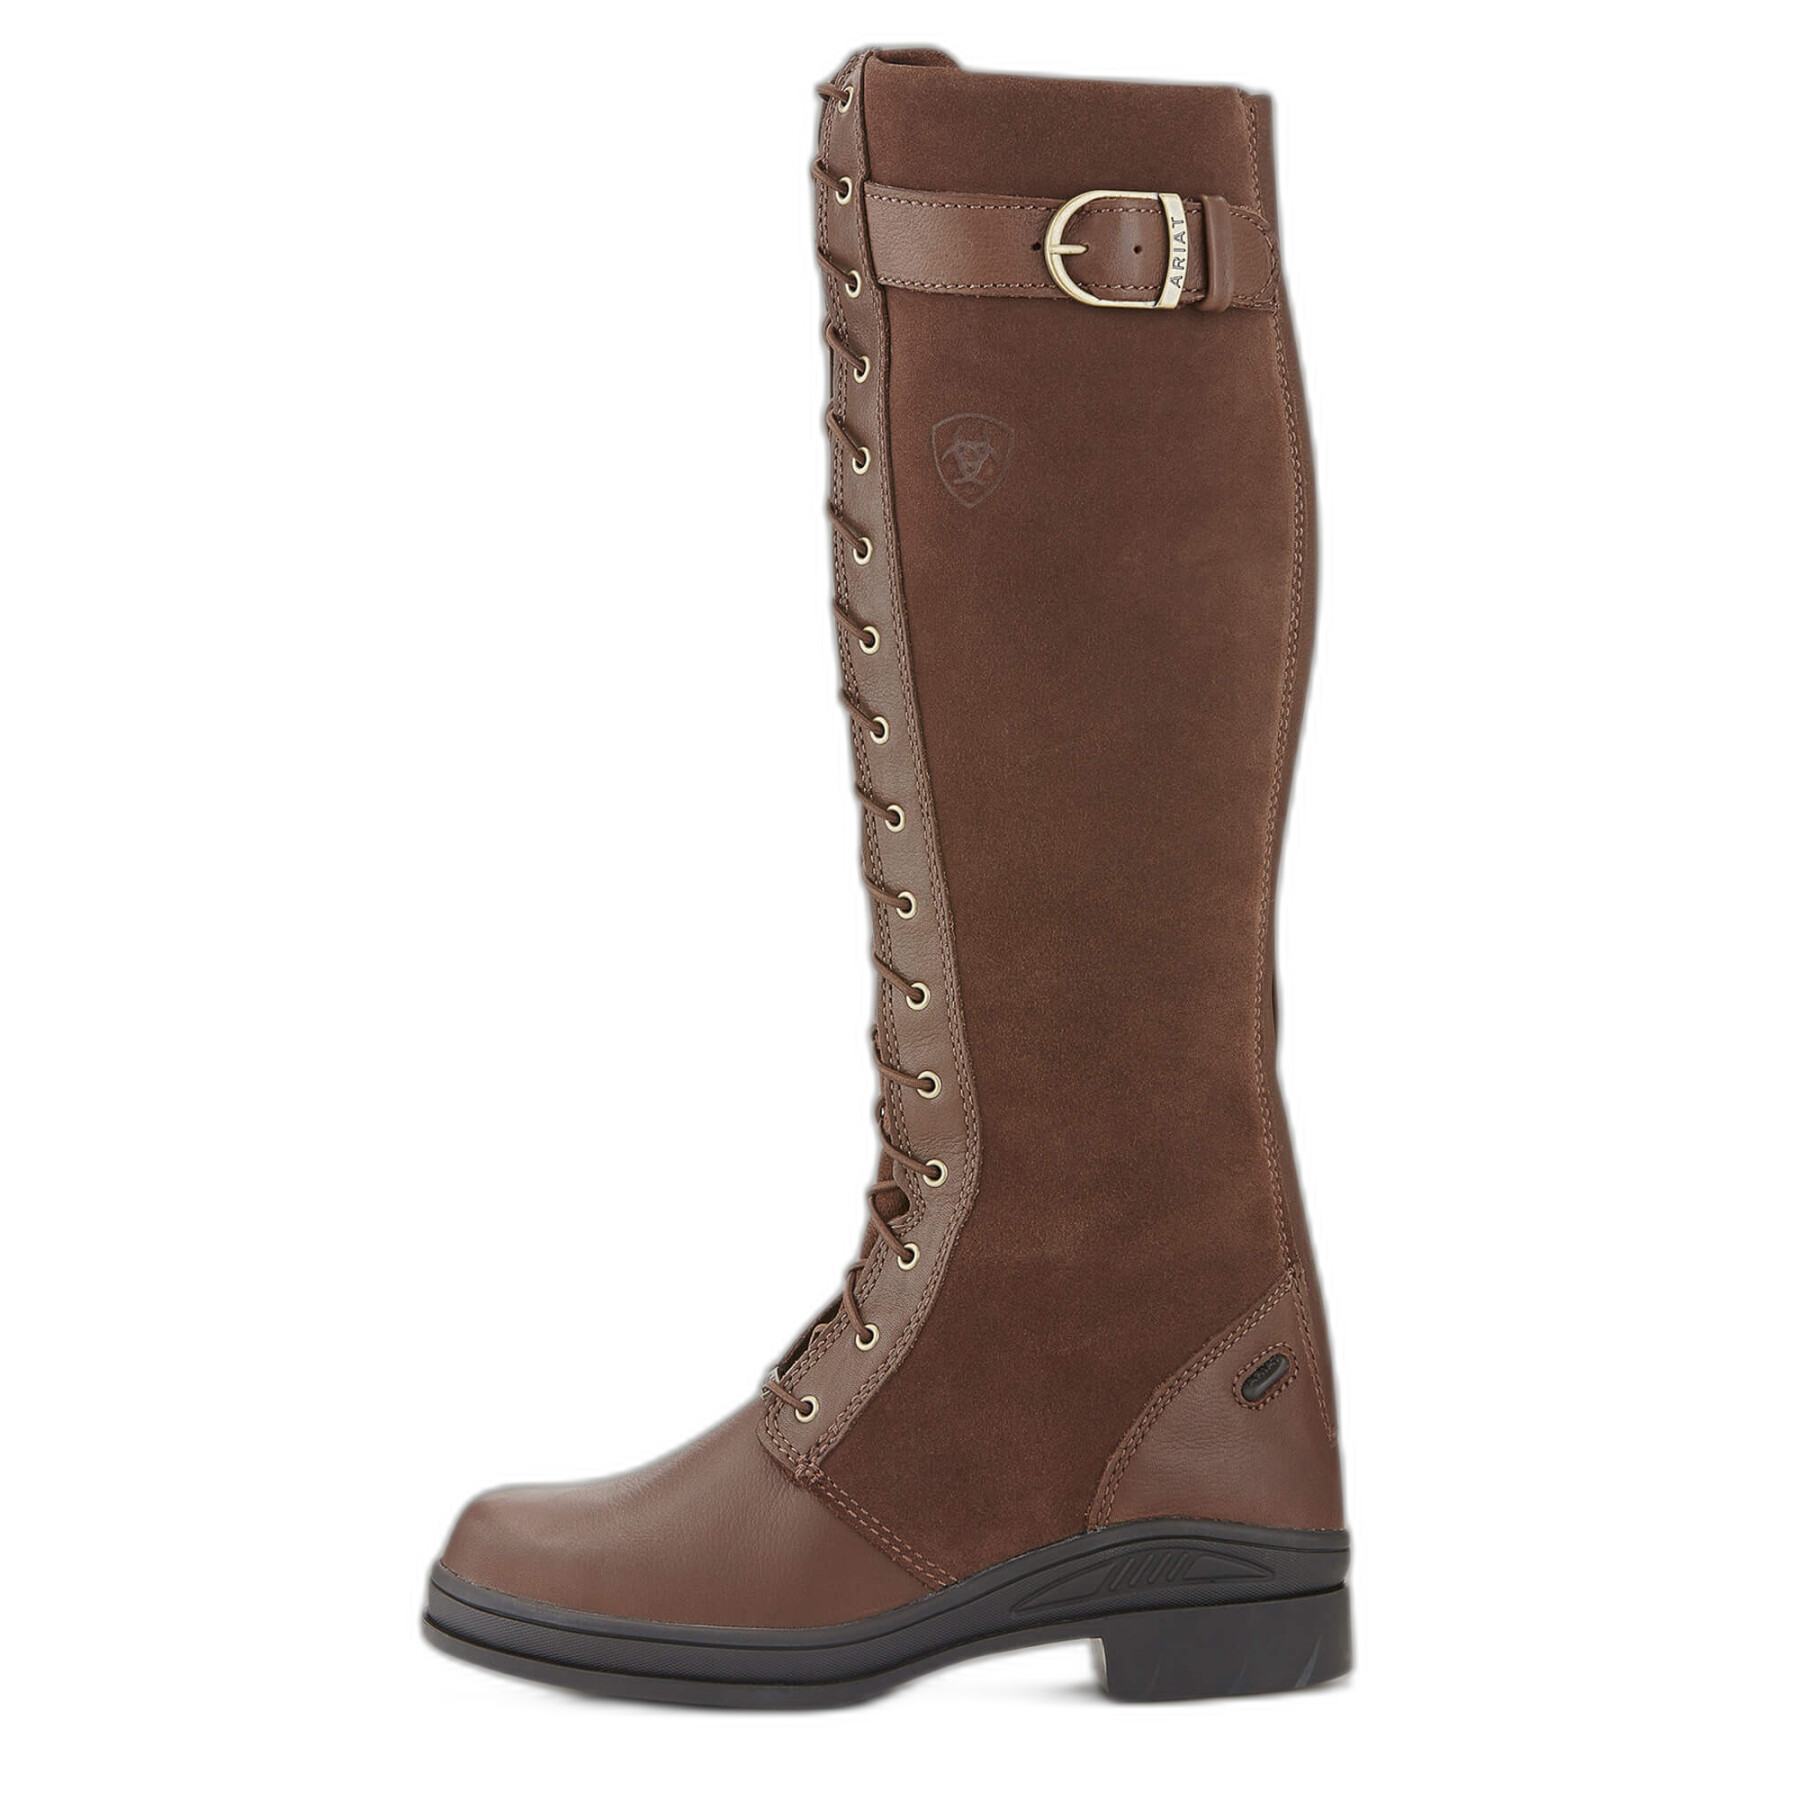 Women's waterproof riding boots Ariat Coniston